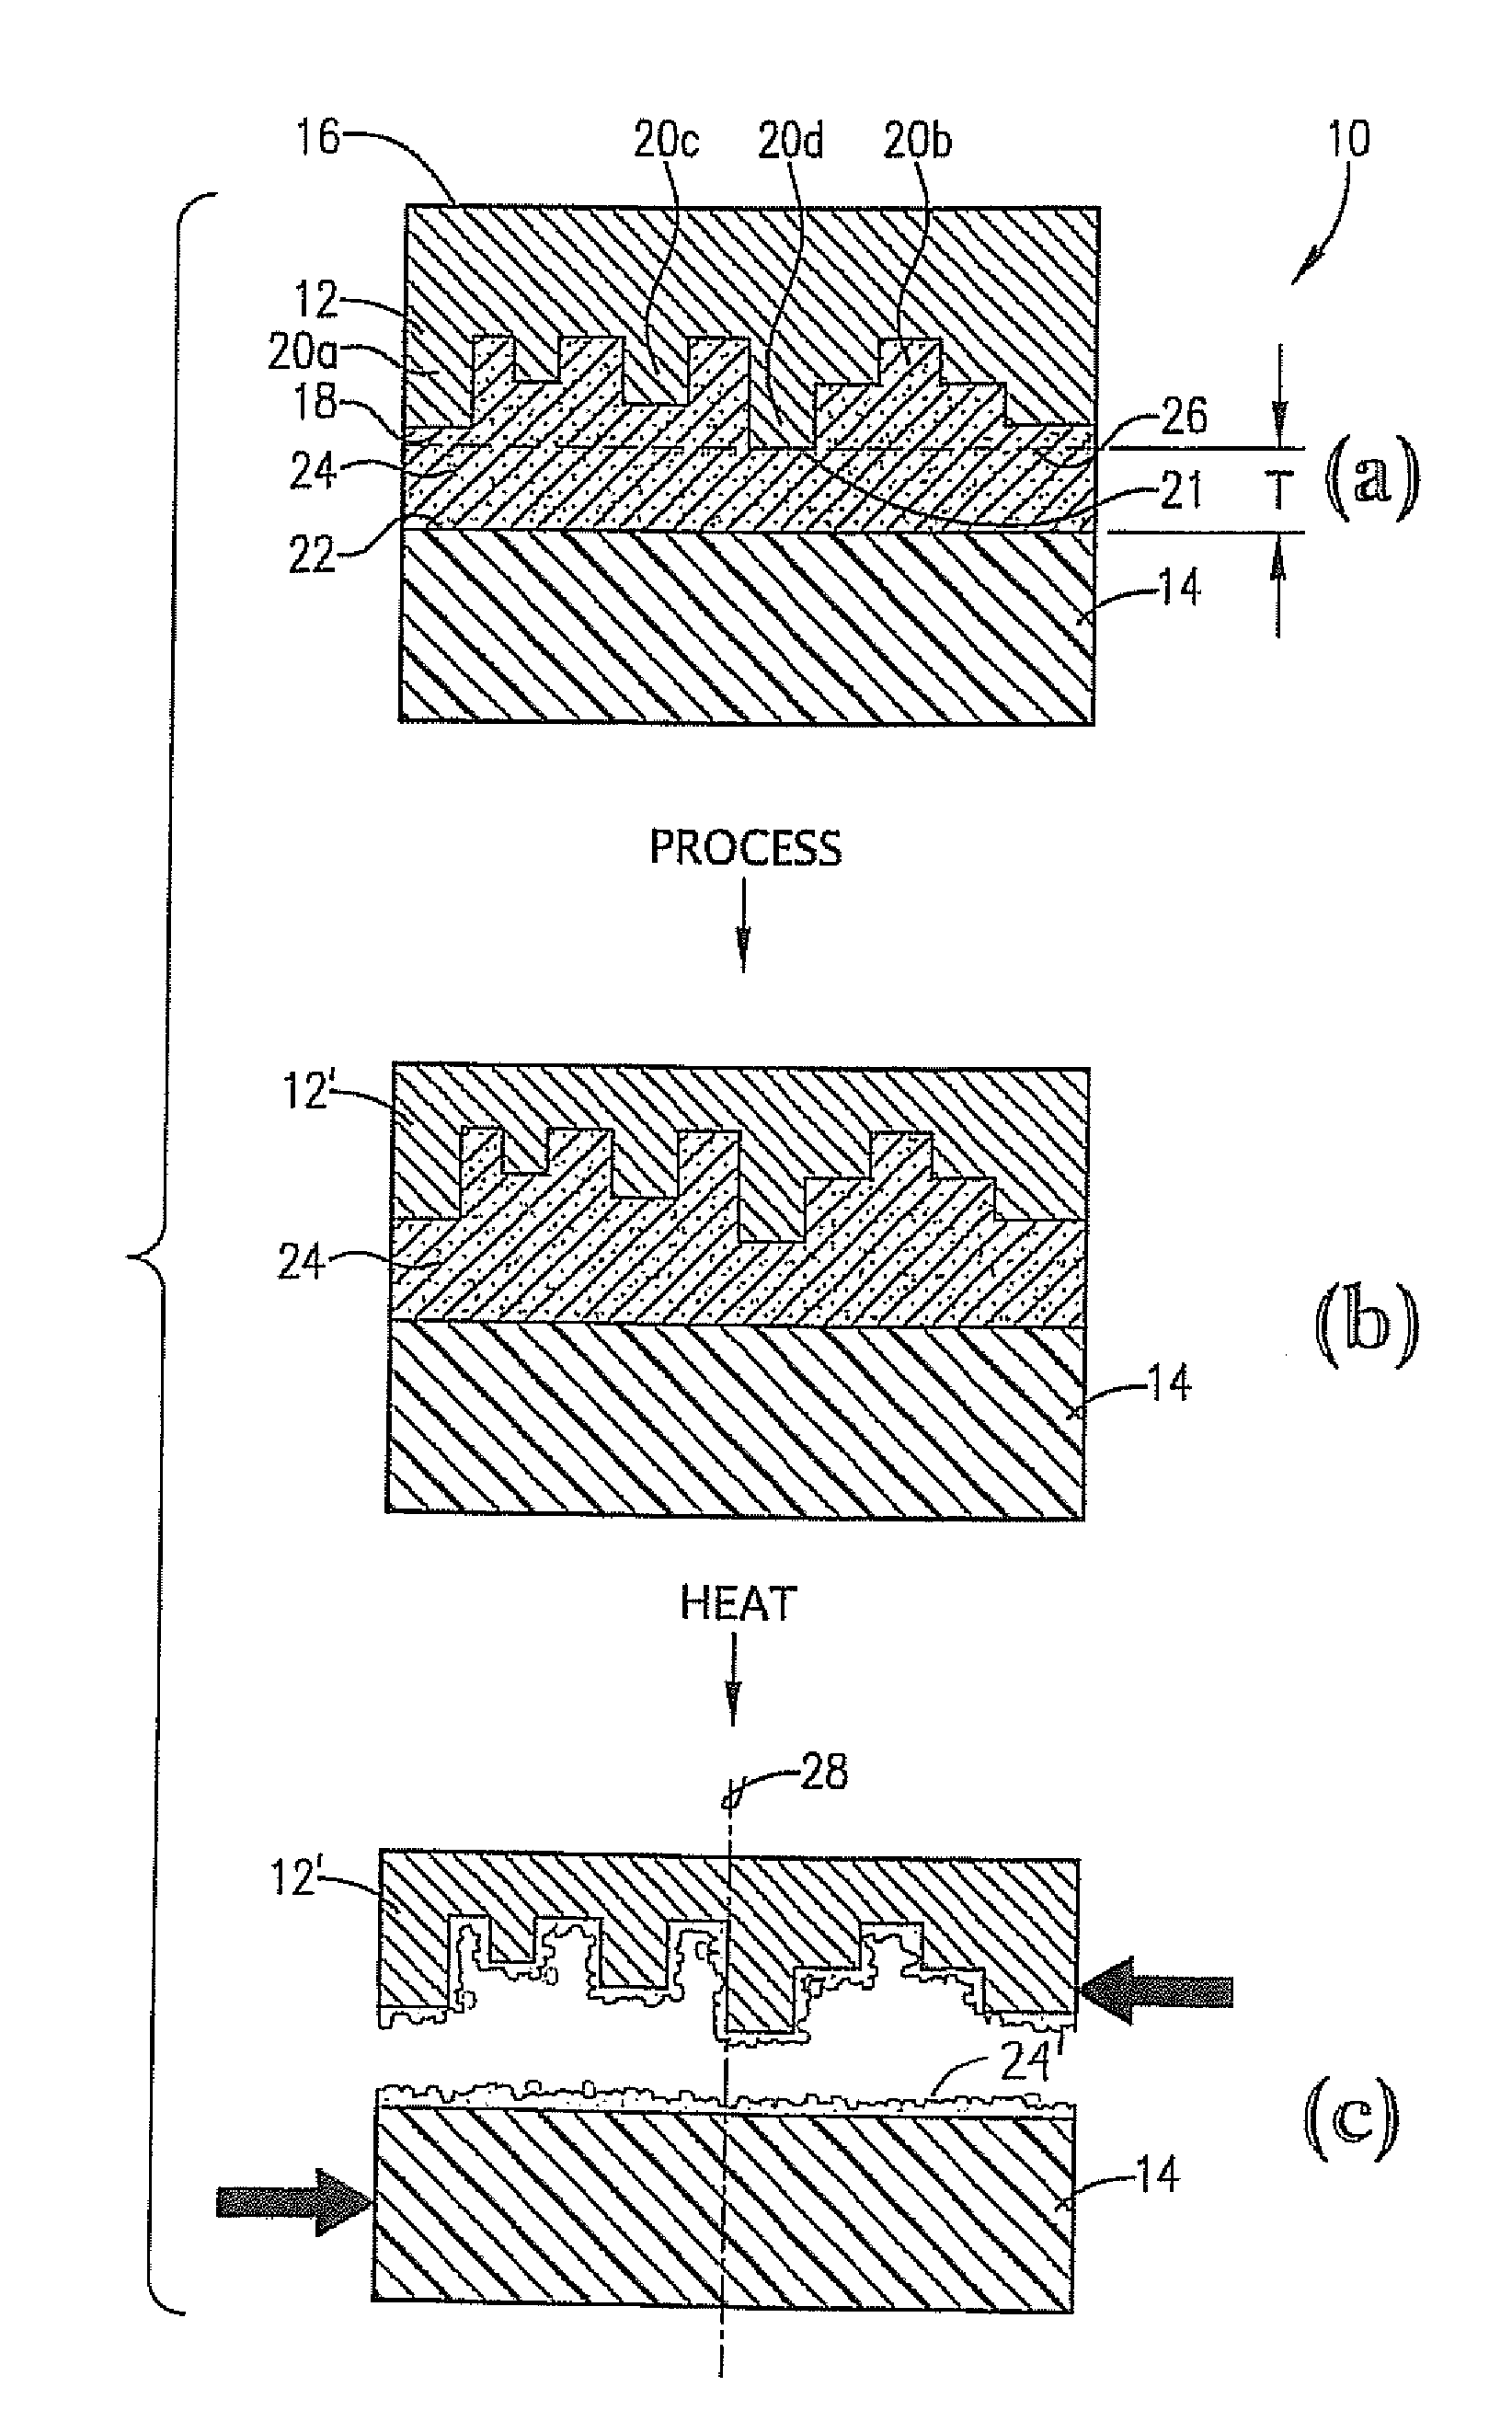 Thermally decomposable spin-on bonding compositions for temporary wafer bonding